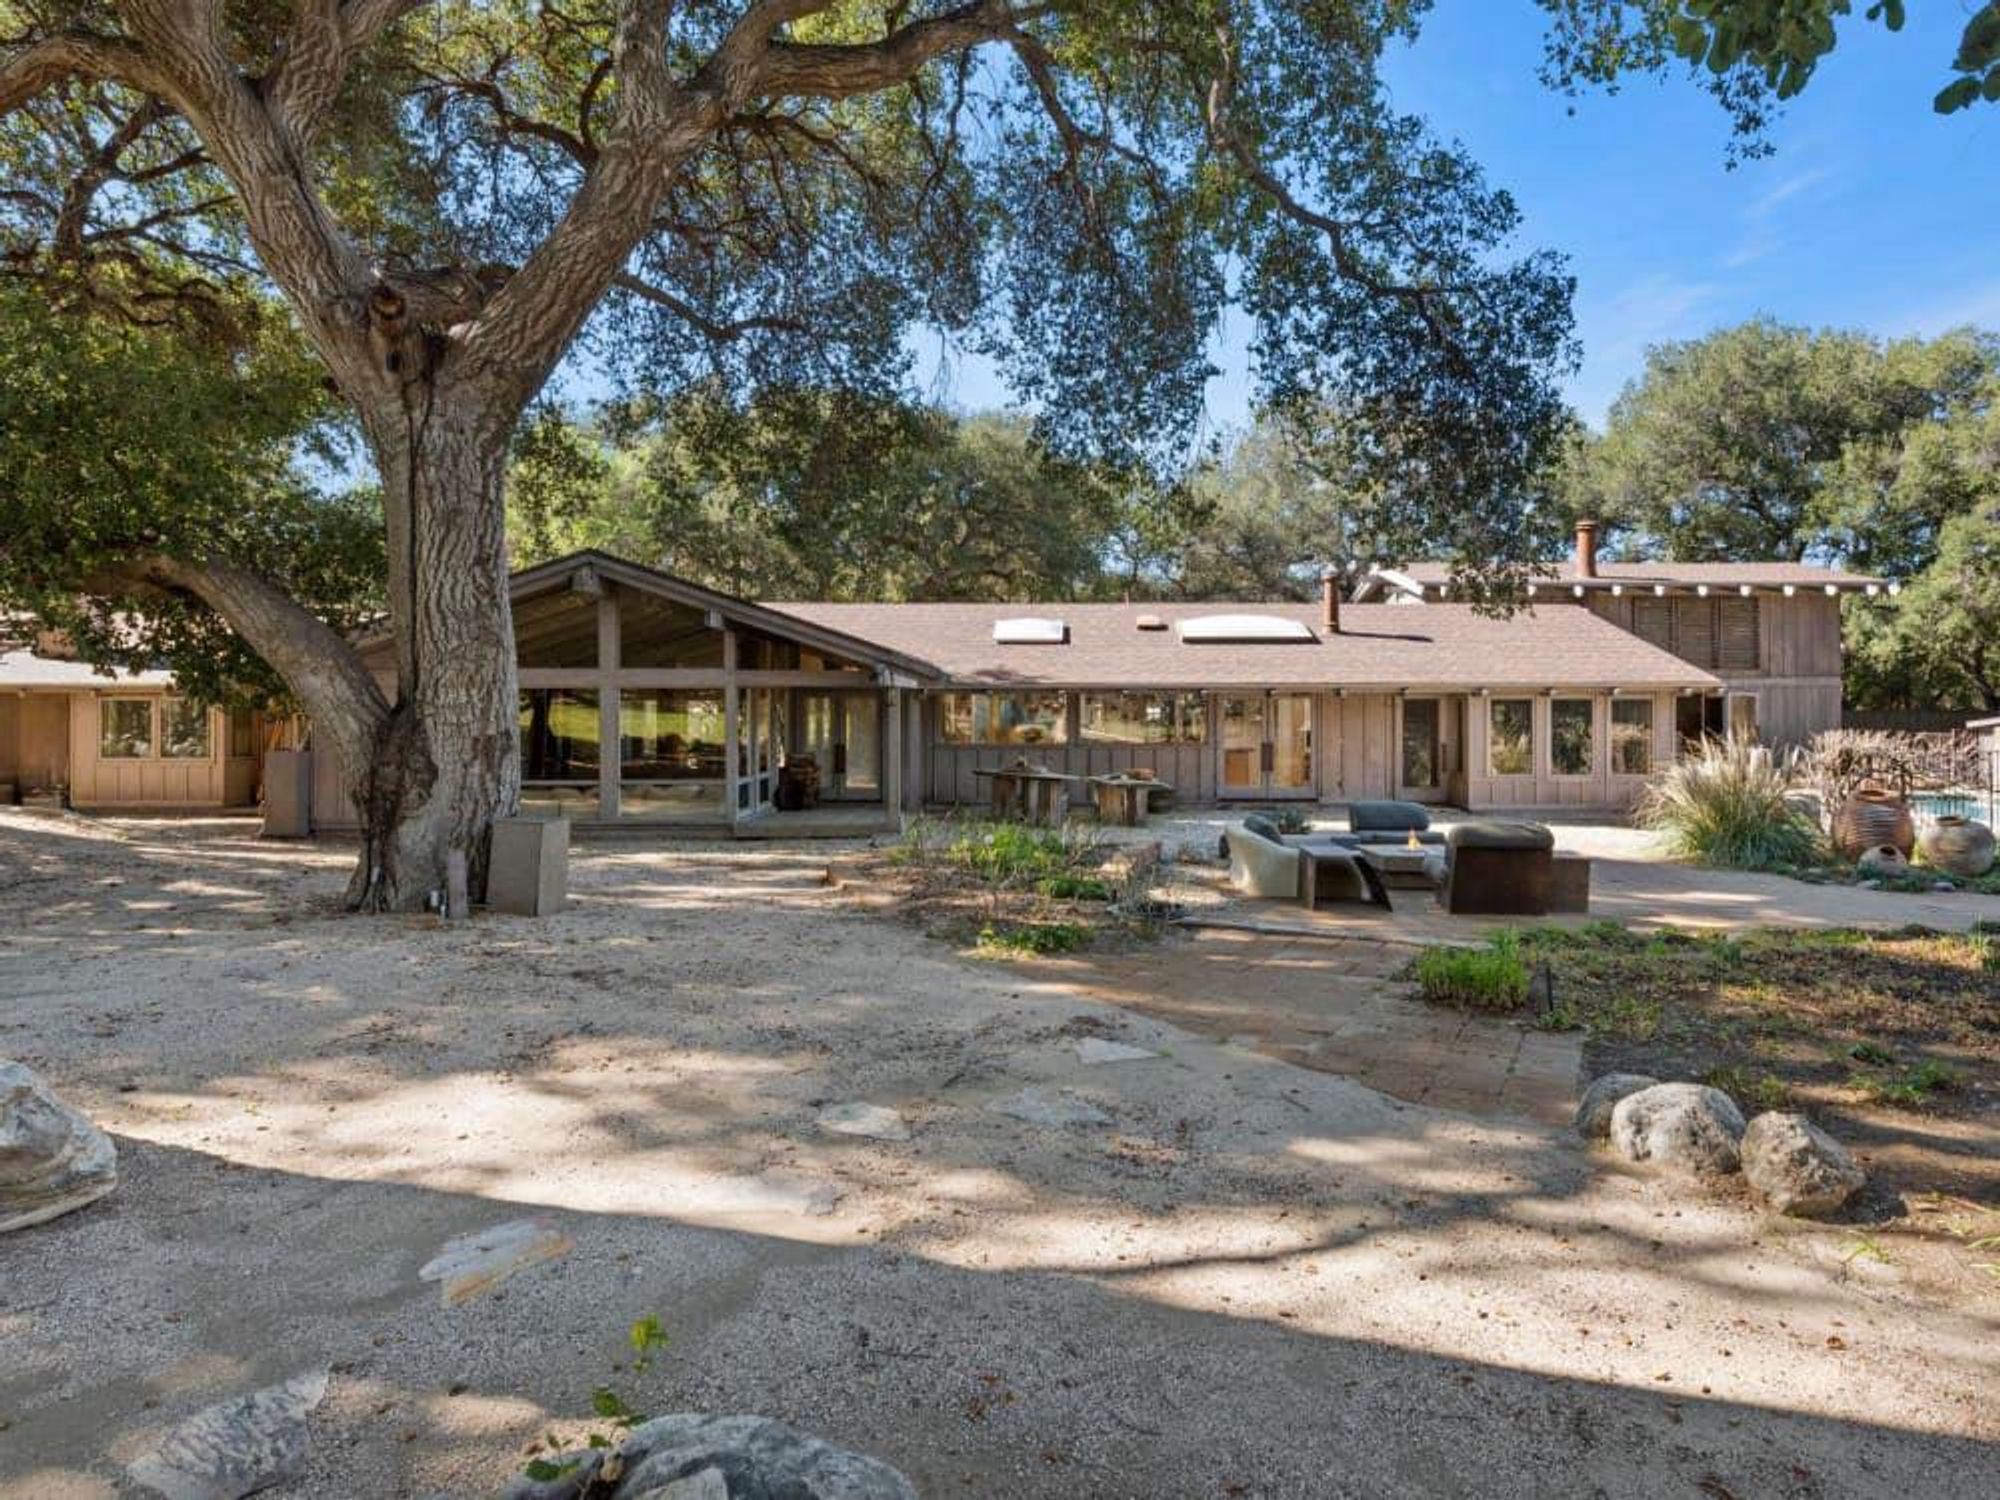 It's dubbed Oak Tree Ranch because of all the centuries-old oaks that fill the property.